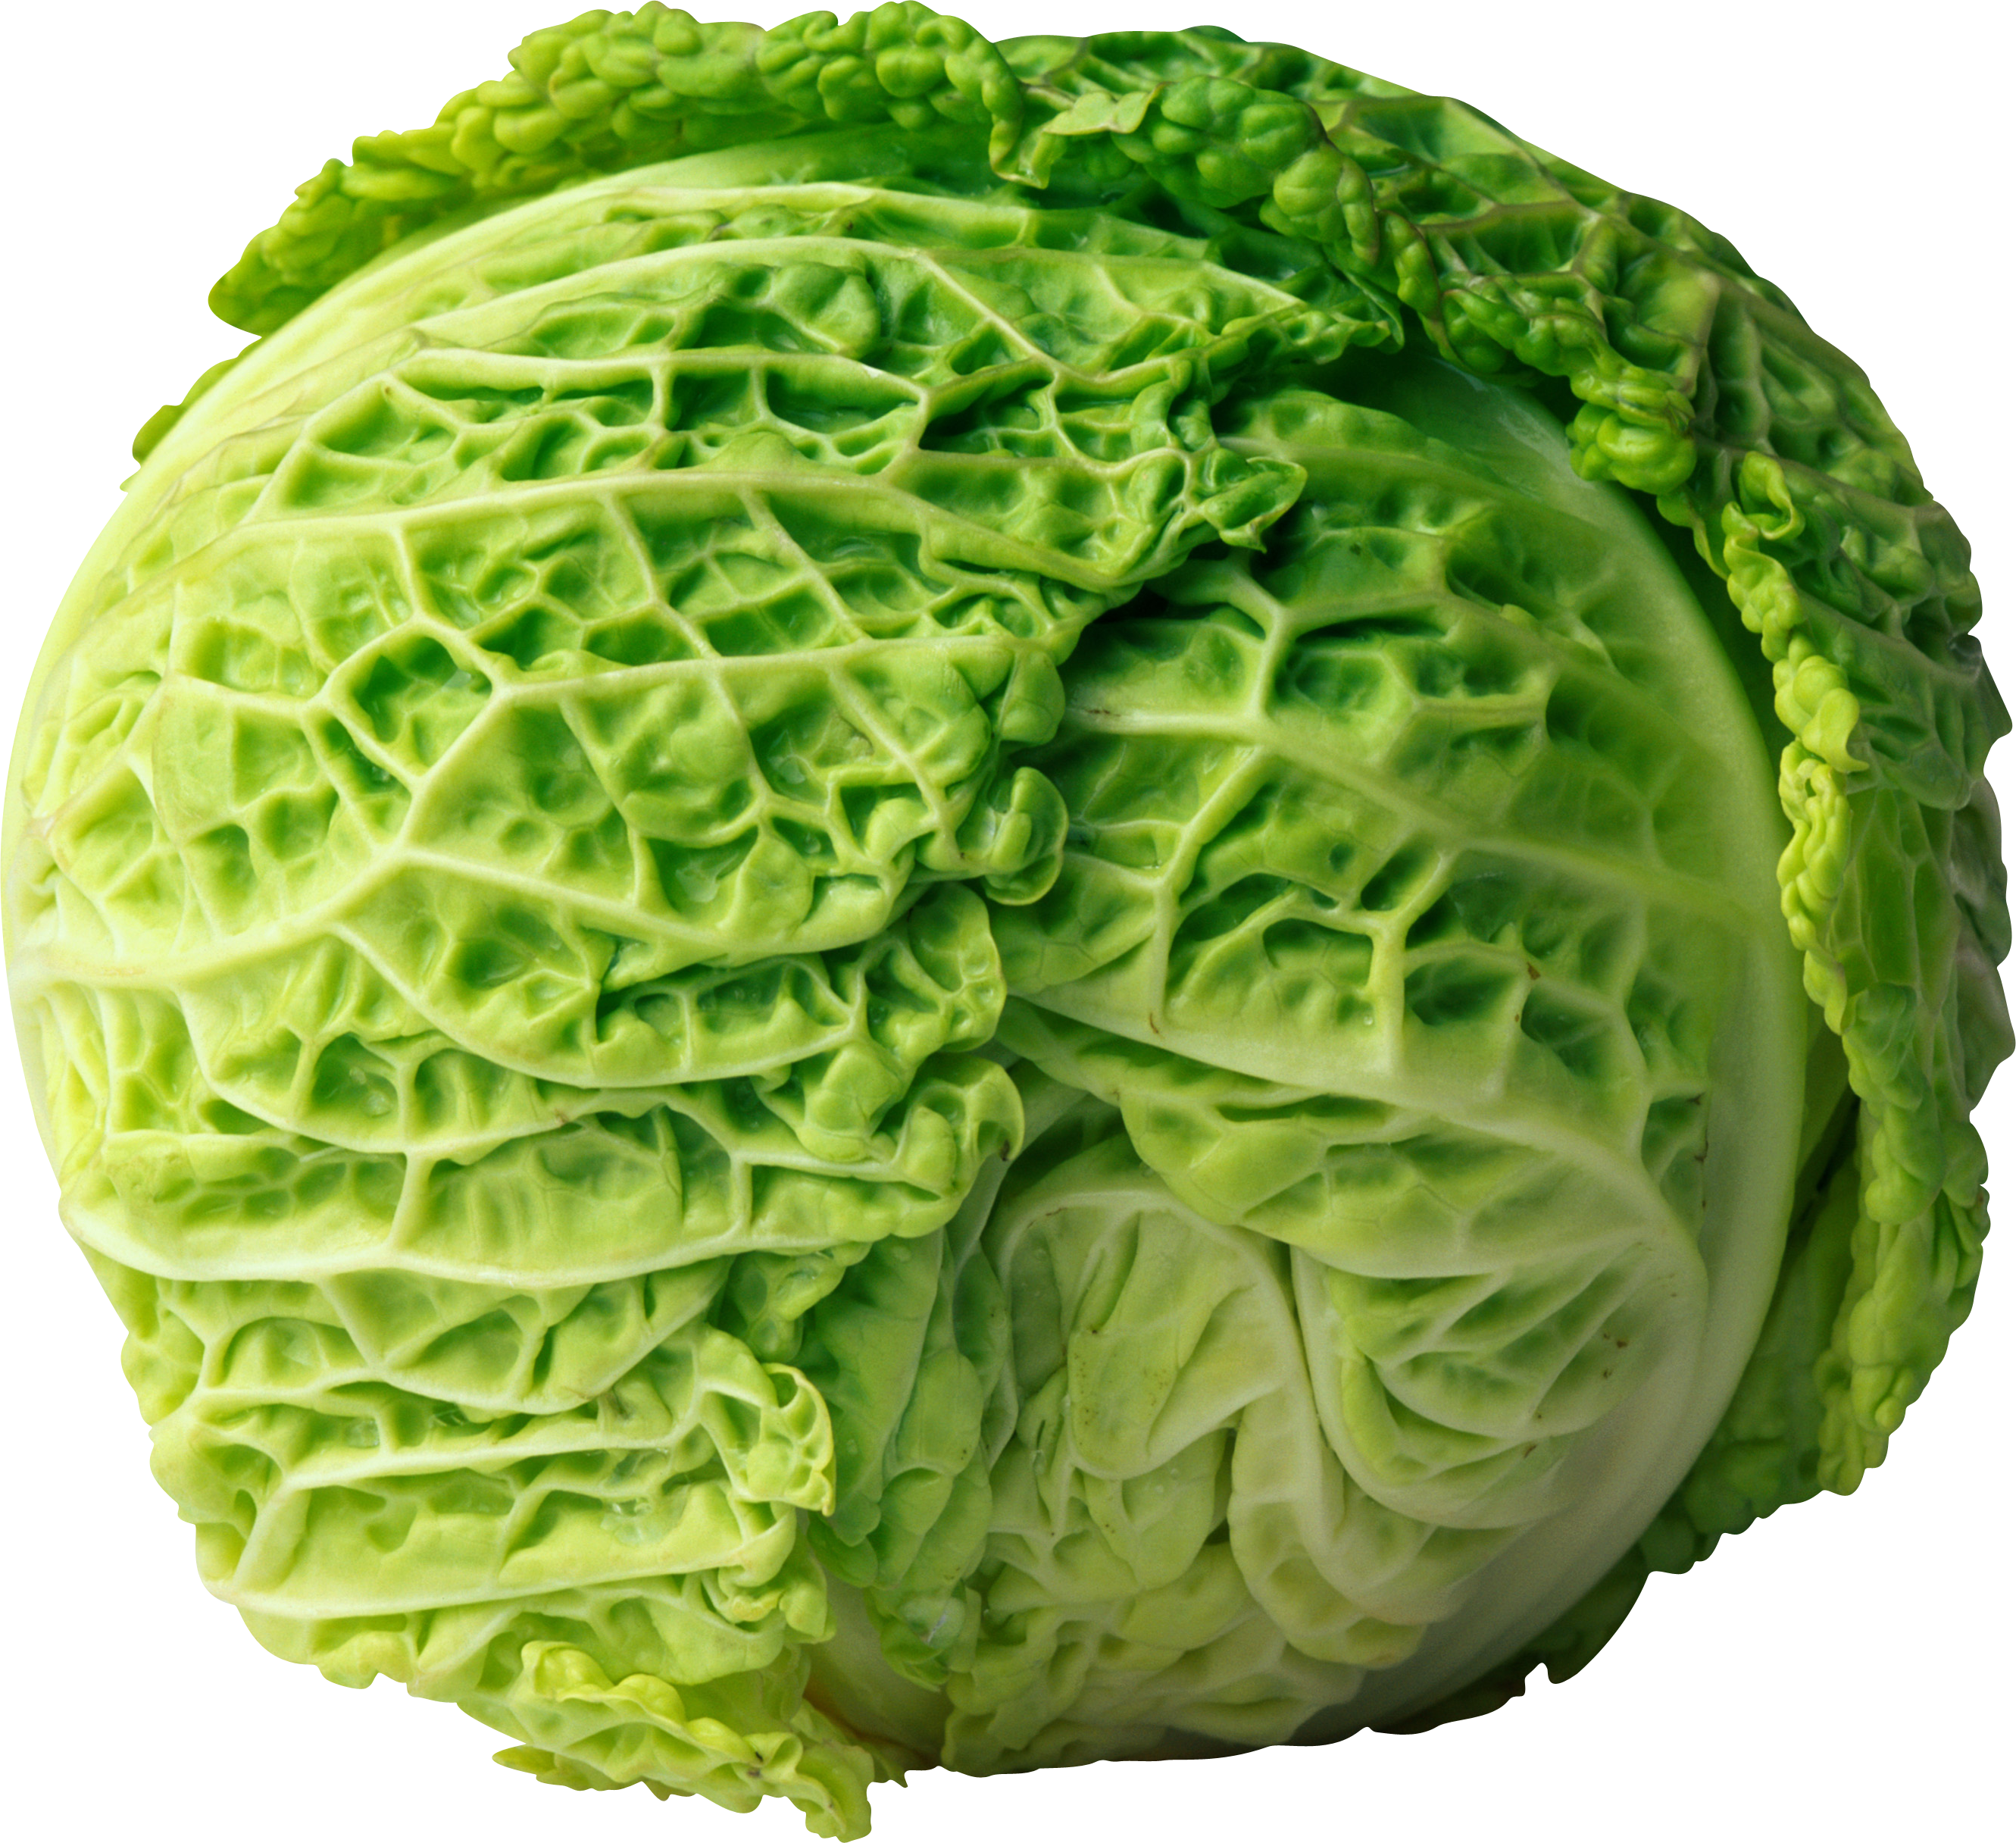 Cabbage Png Image - Cabbage, Transparent background PNG HD thumbnail